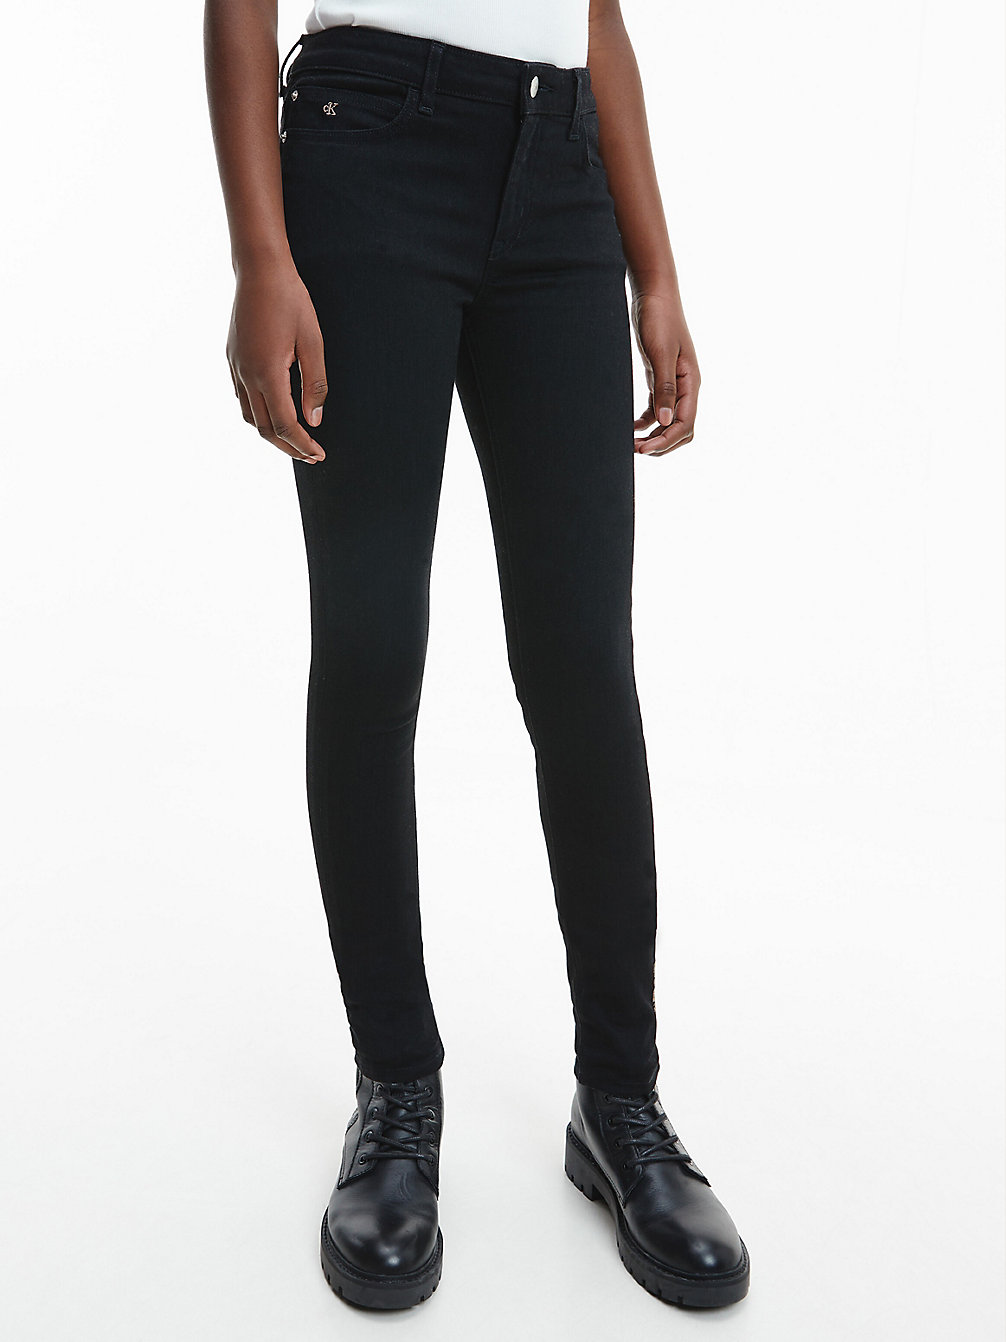 Mid Rise Skinny Jeans > CLEAN BLACK STRETCH > undefined bambina > Calvin Klein